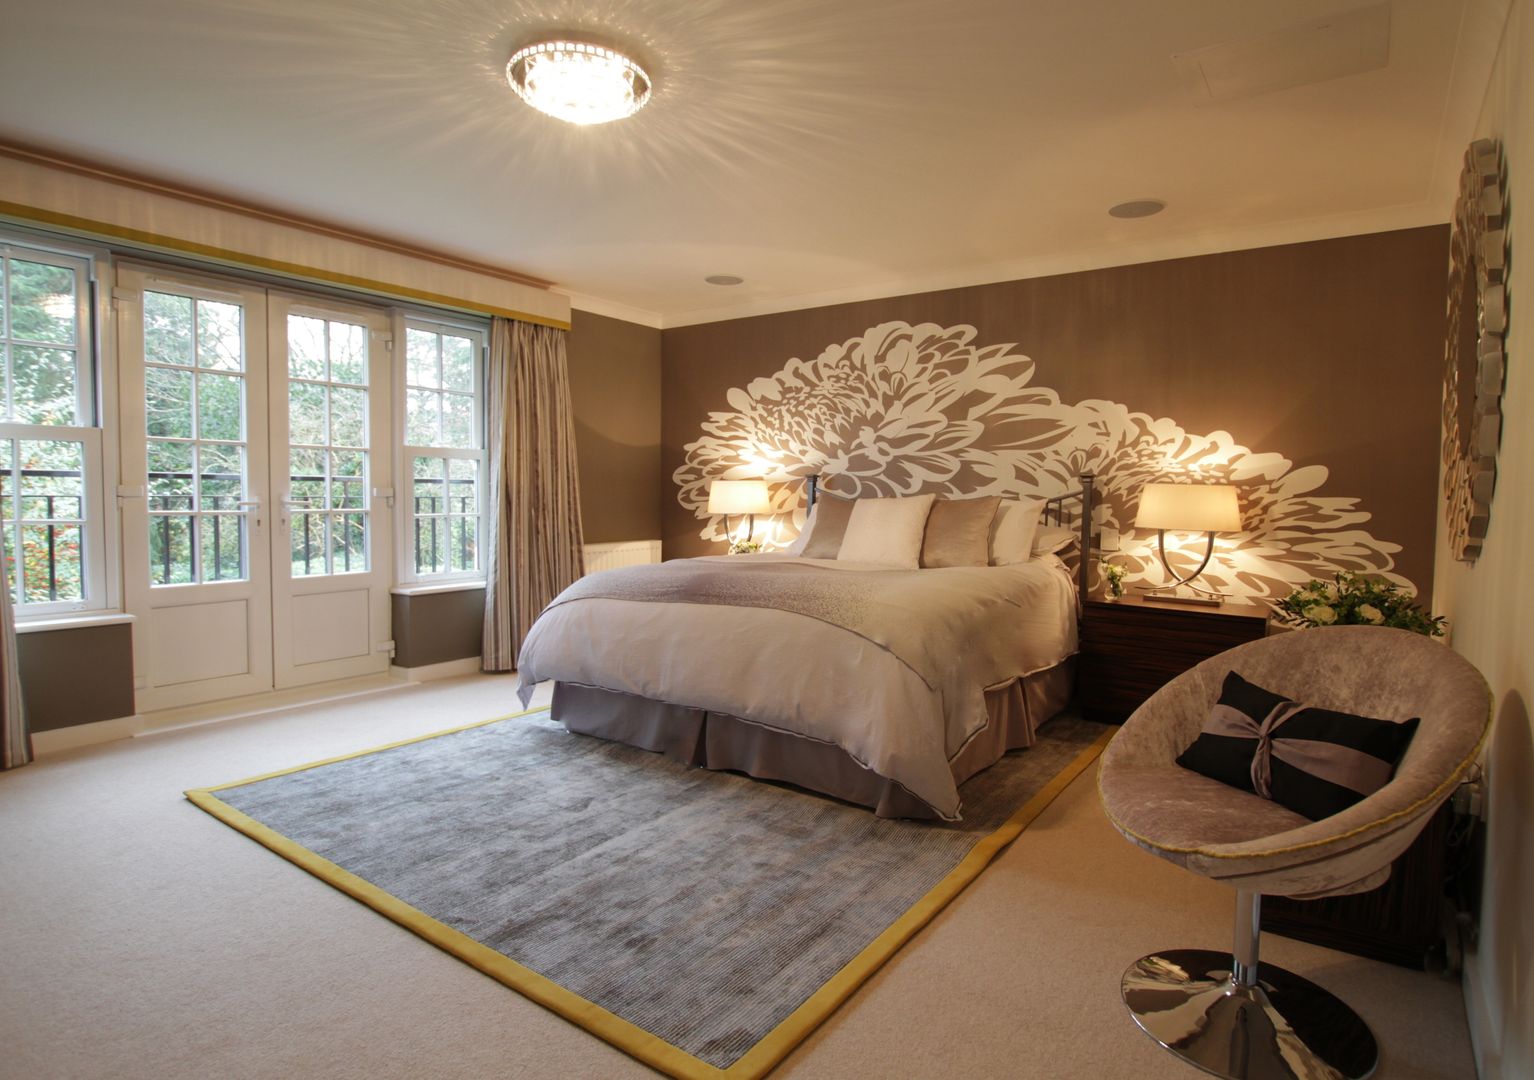 A Stunning Master Bedroom with White Floral Wall Mural & Lime Edge Rug Design by Deborah Ltd Camera da letto moderna